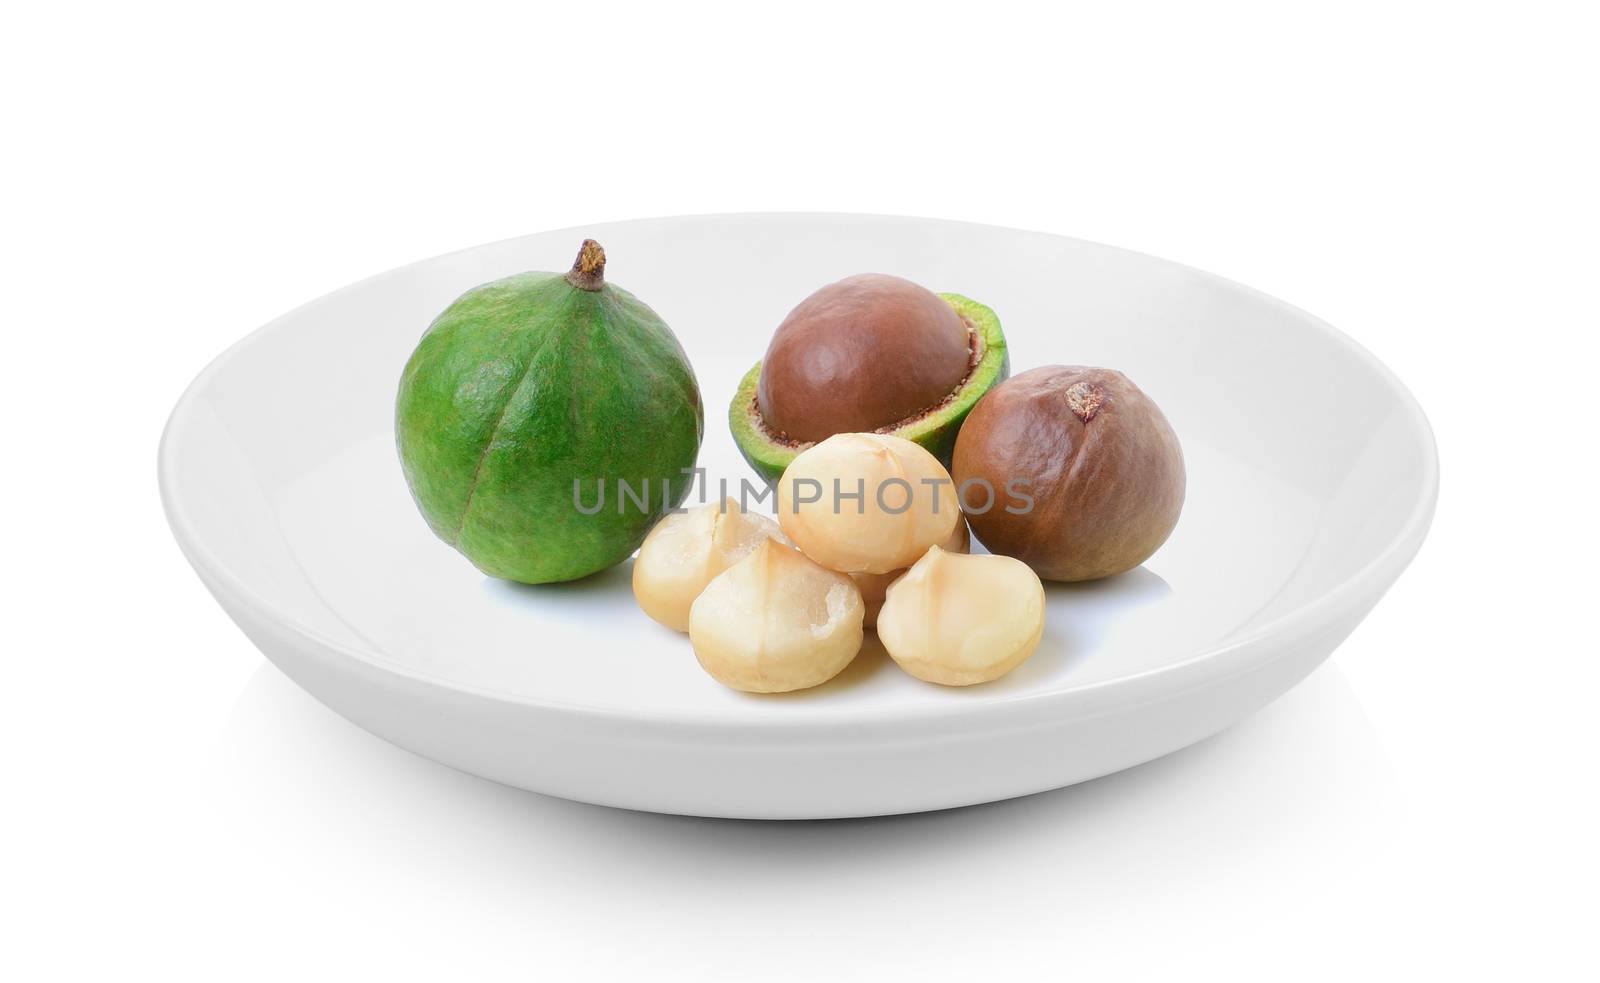 macadamia nuts in plate on white background by sommai